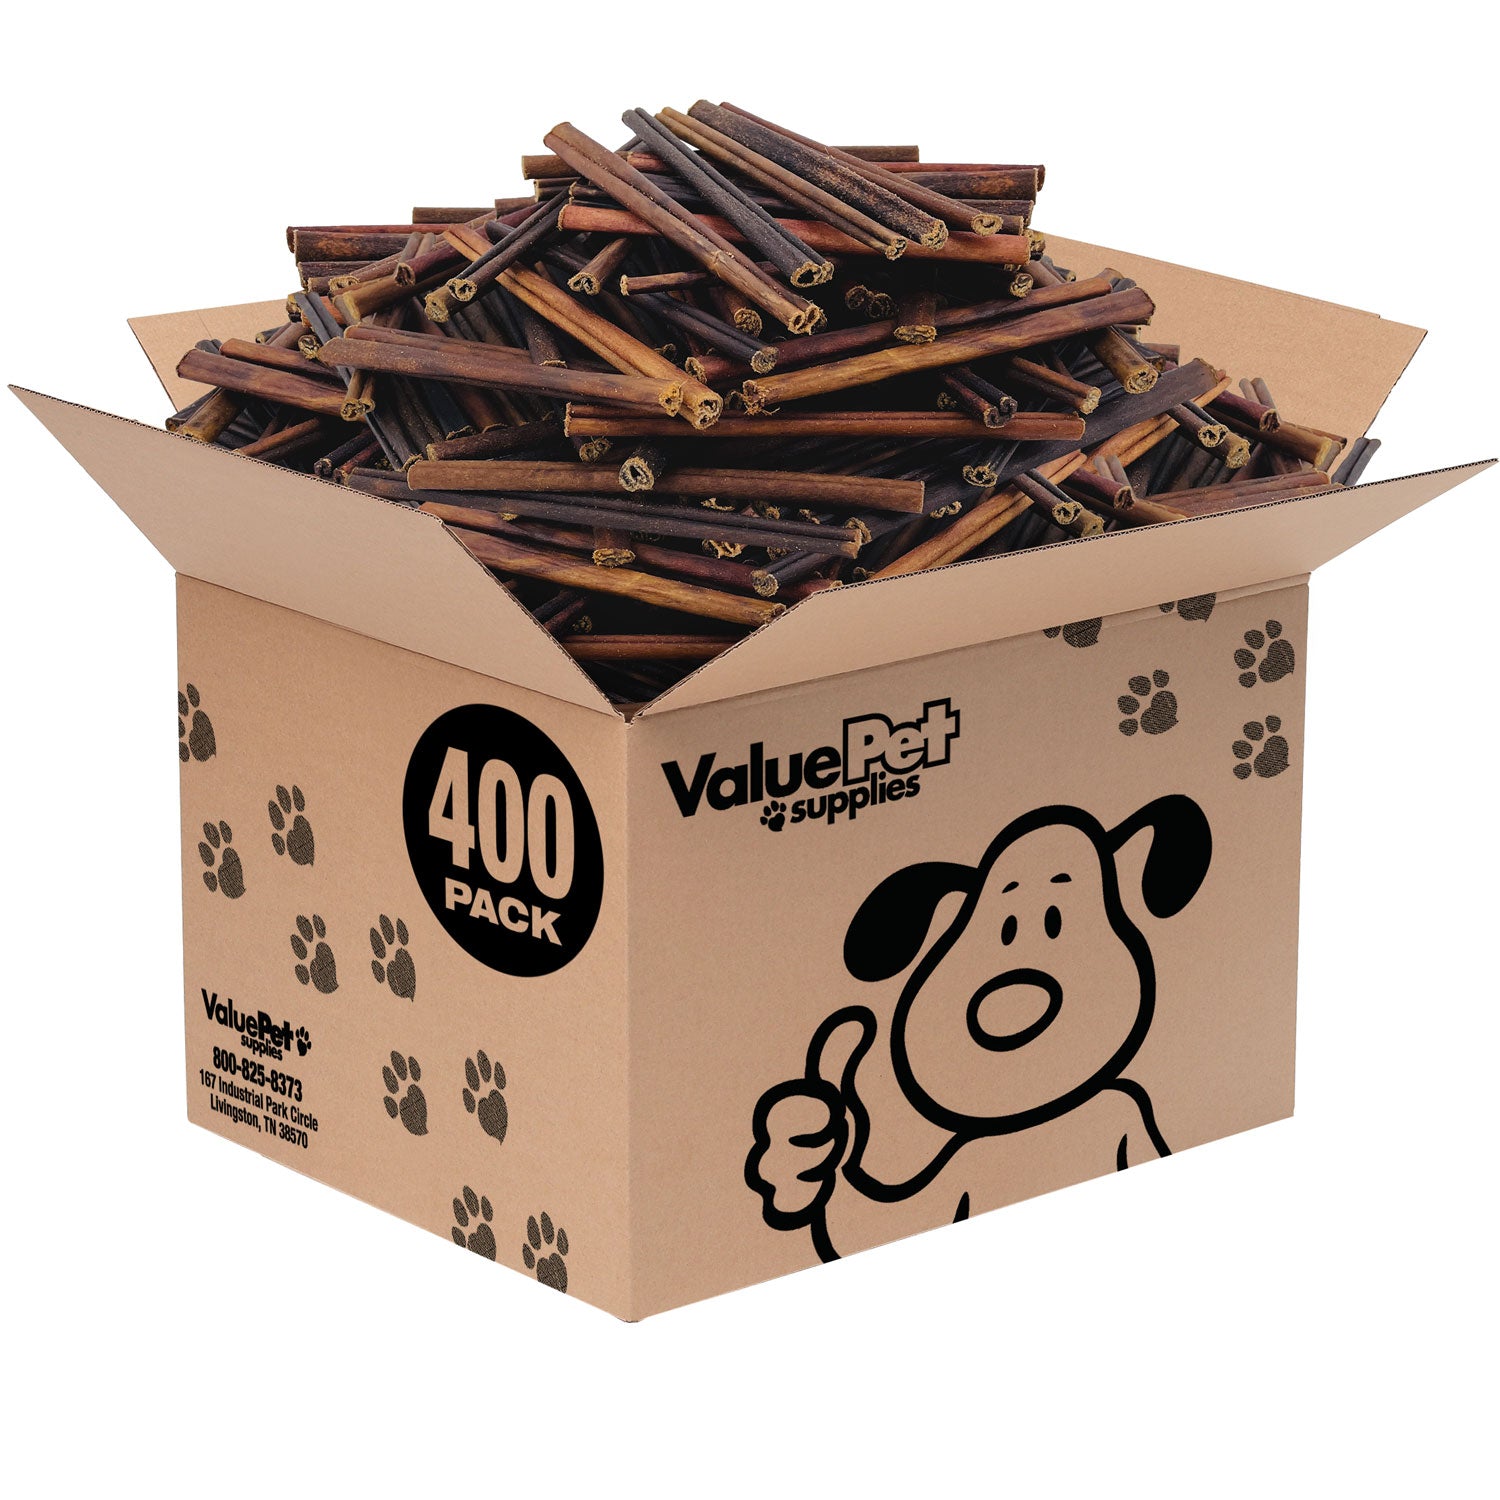 ValueBull Collagen Sticks, Long Lasting Beef Small Dog Chews , Healthy & Safe, Extra Thin 6 Inch, 400 Count WHOLESALE PACK